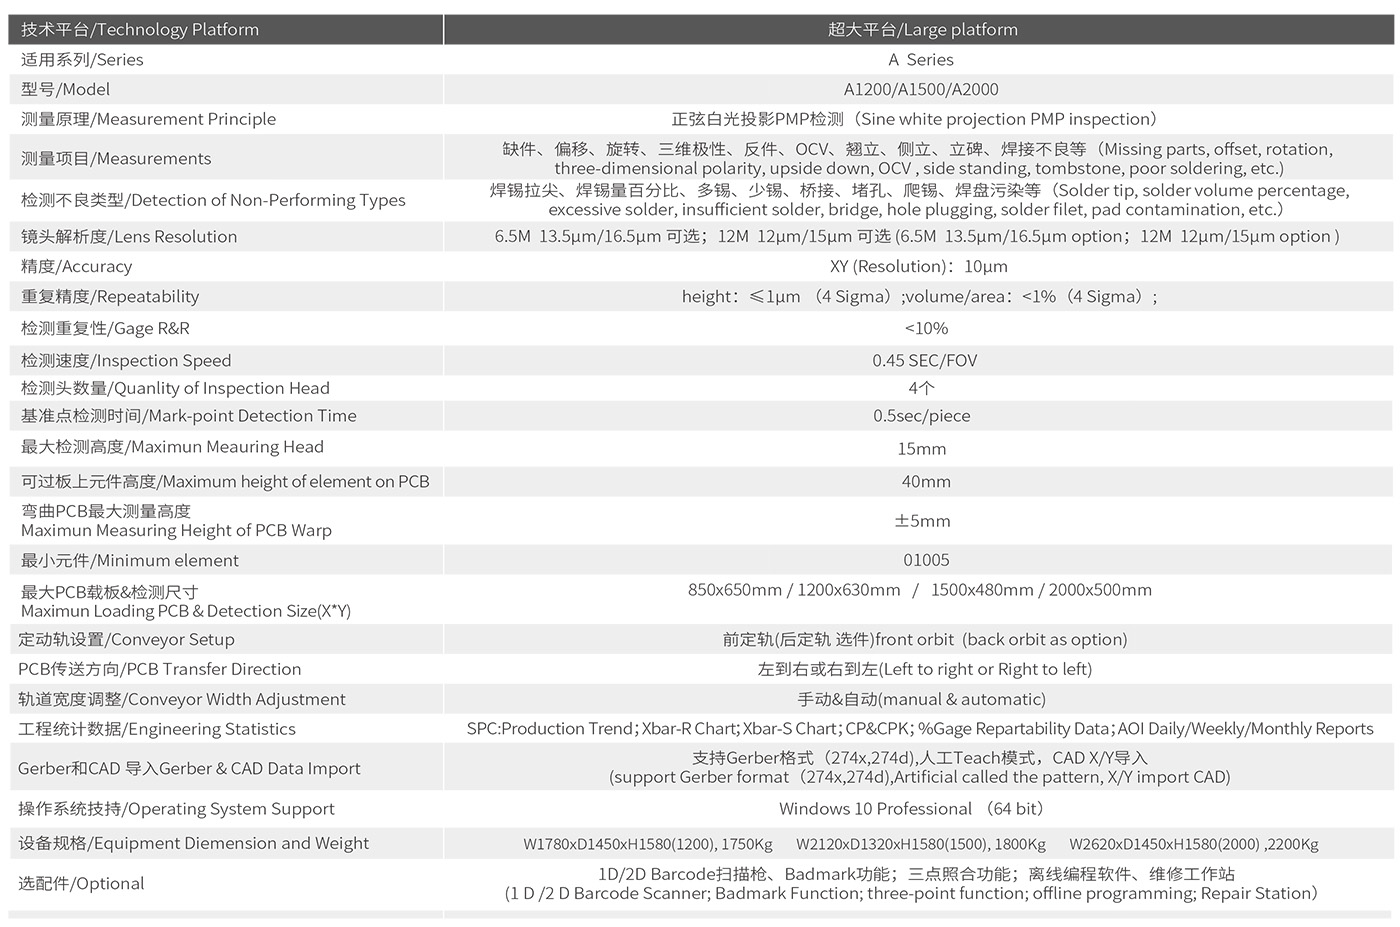 A-1500 Technical Specifications